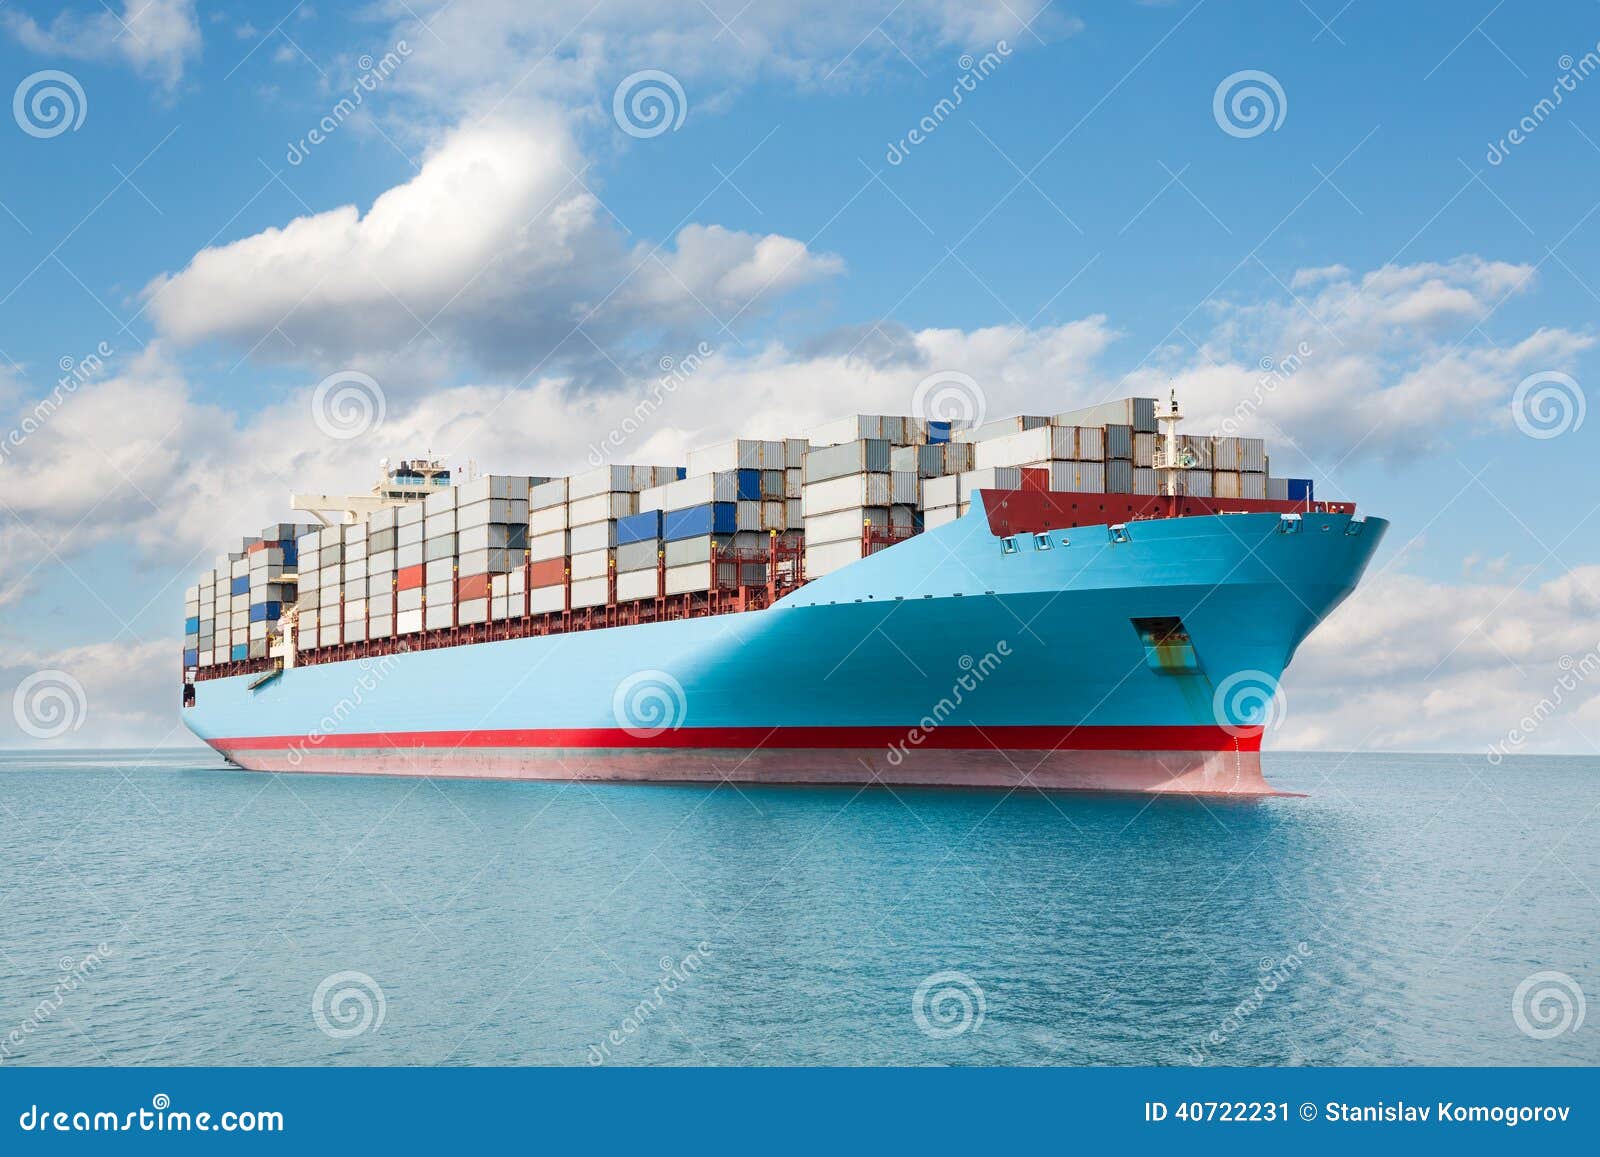 container carrier is at sea